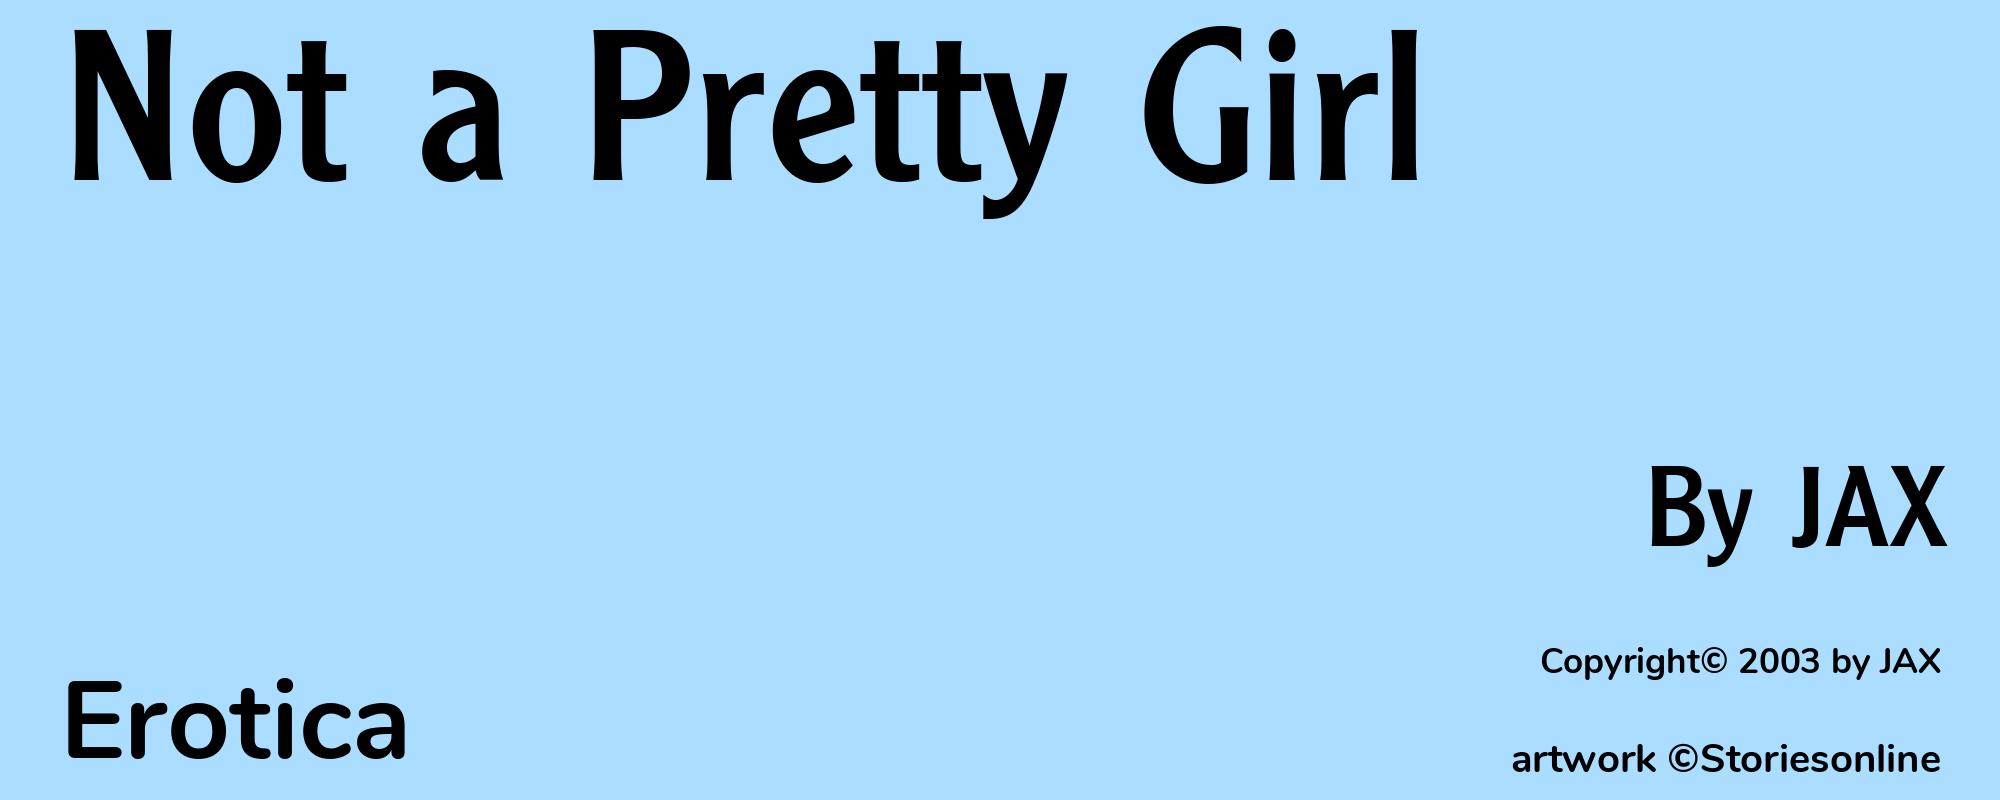 Not a Pretty Girl - Cover